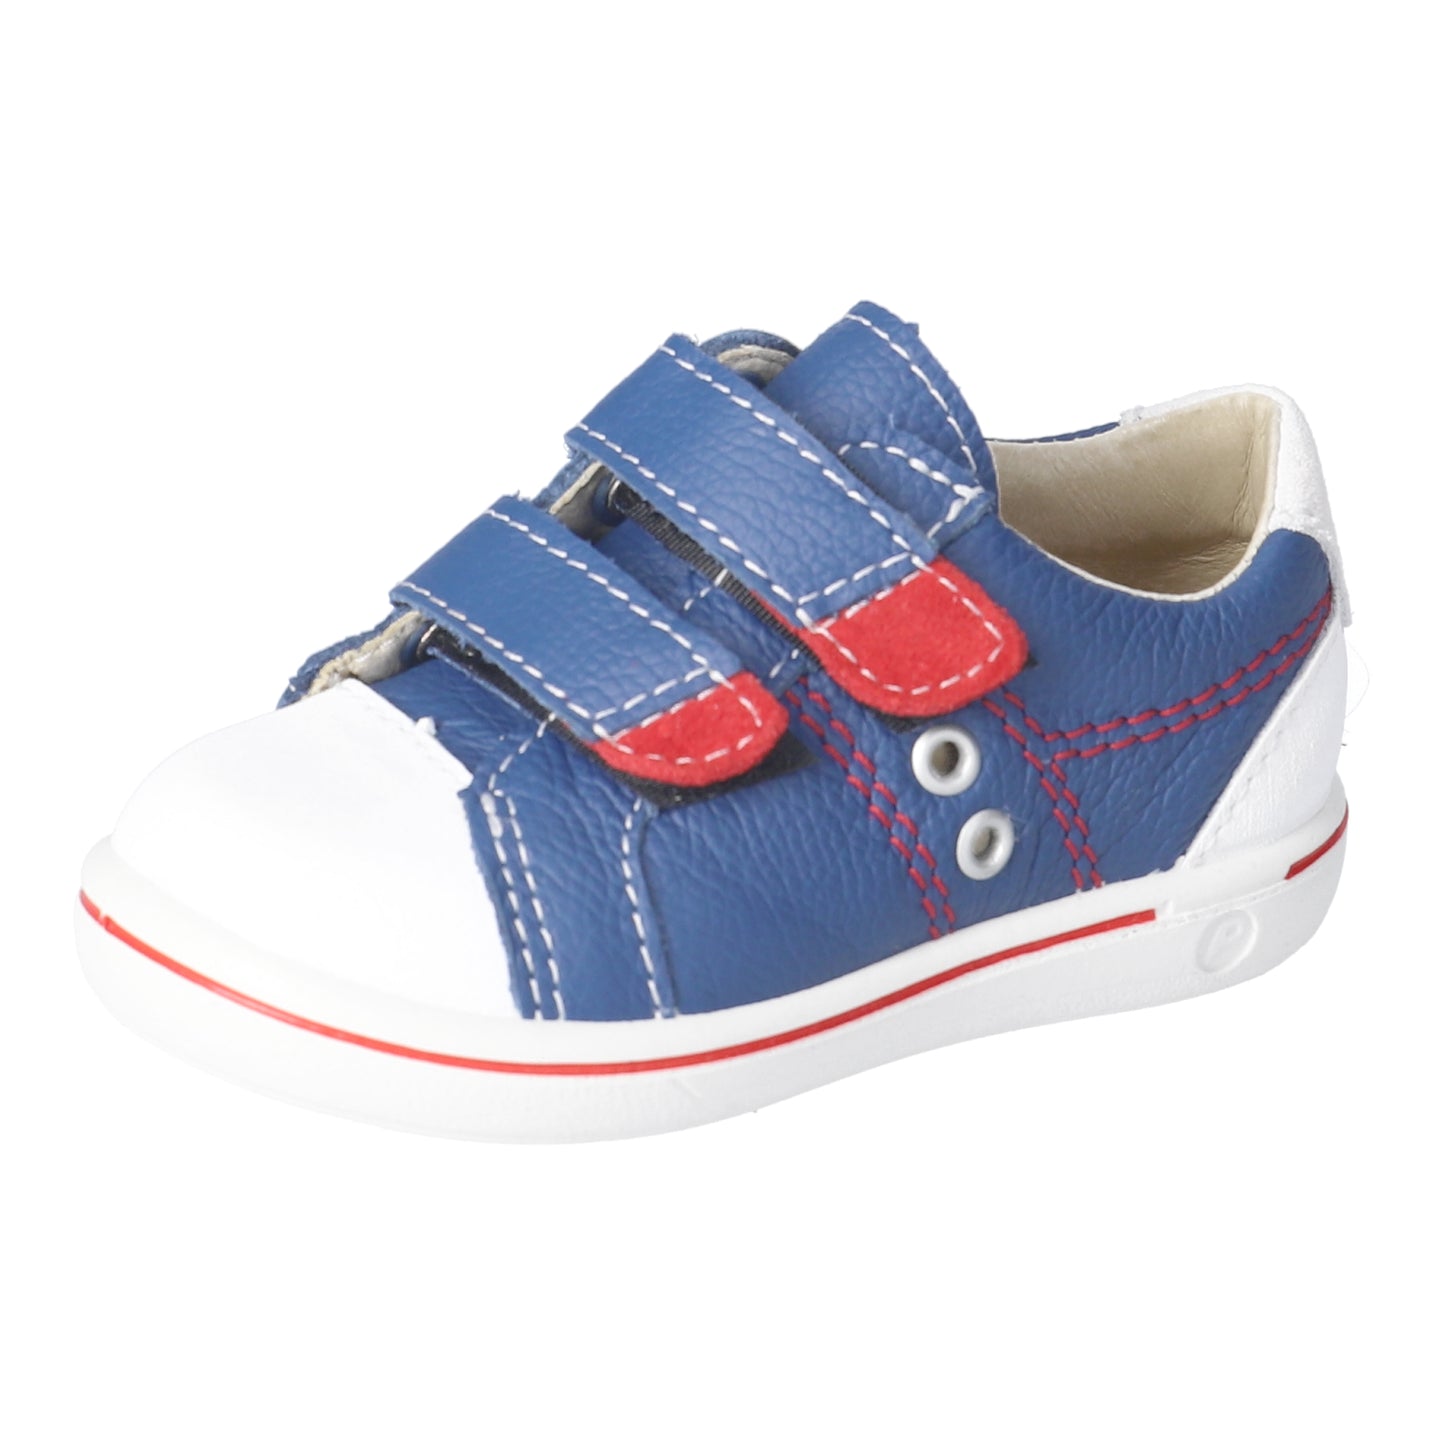 Nippy Leather Sneaker in Blue and Red